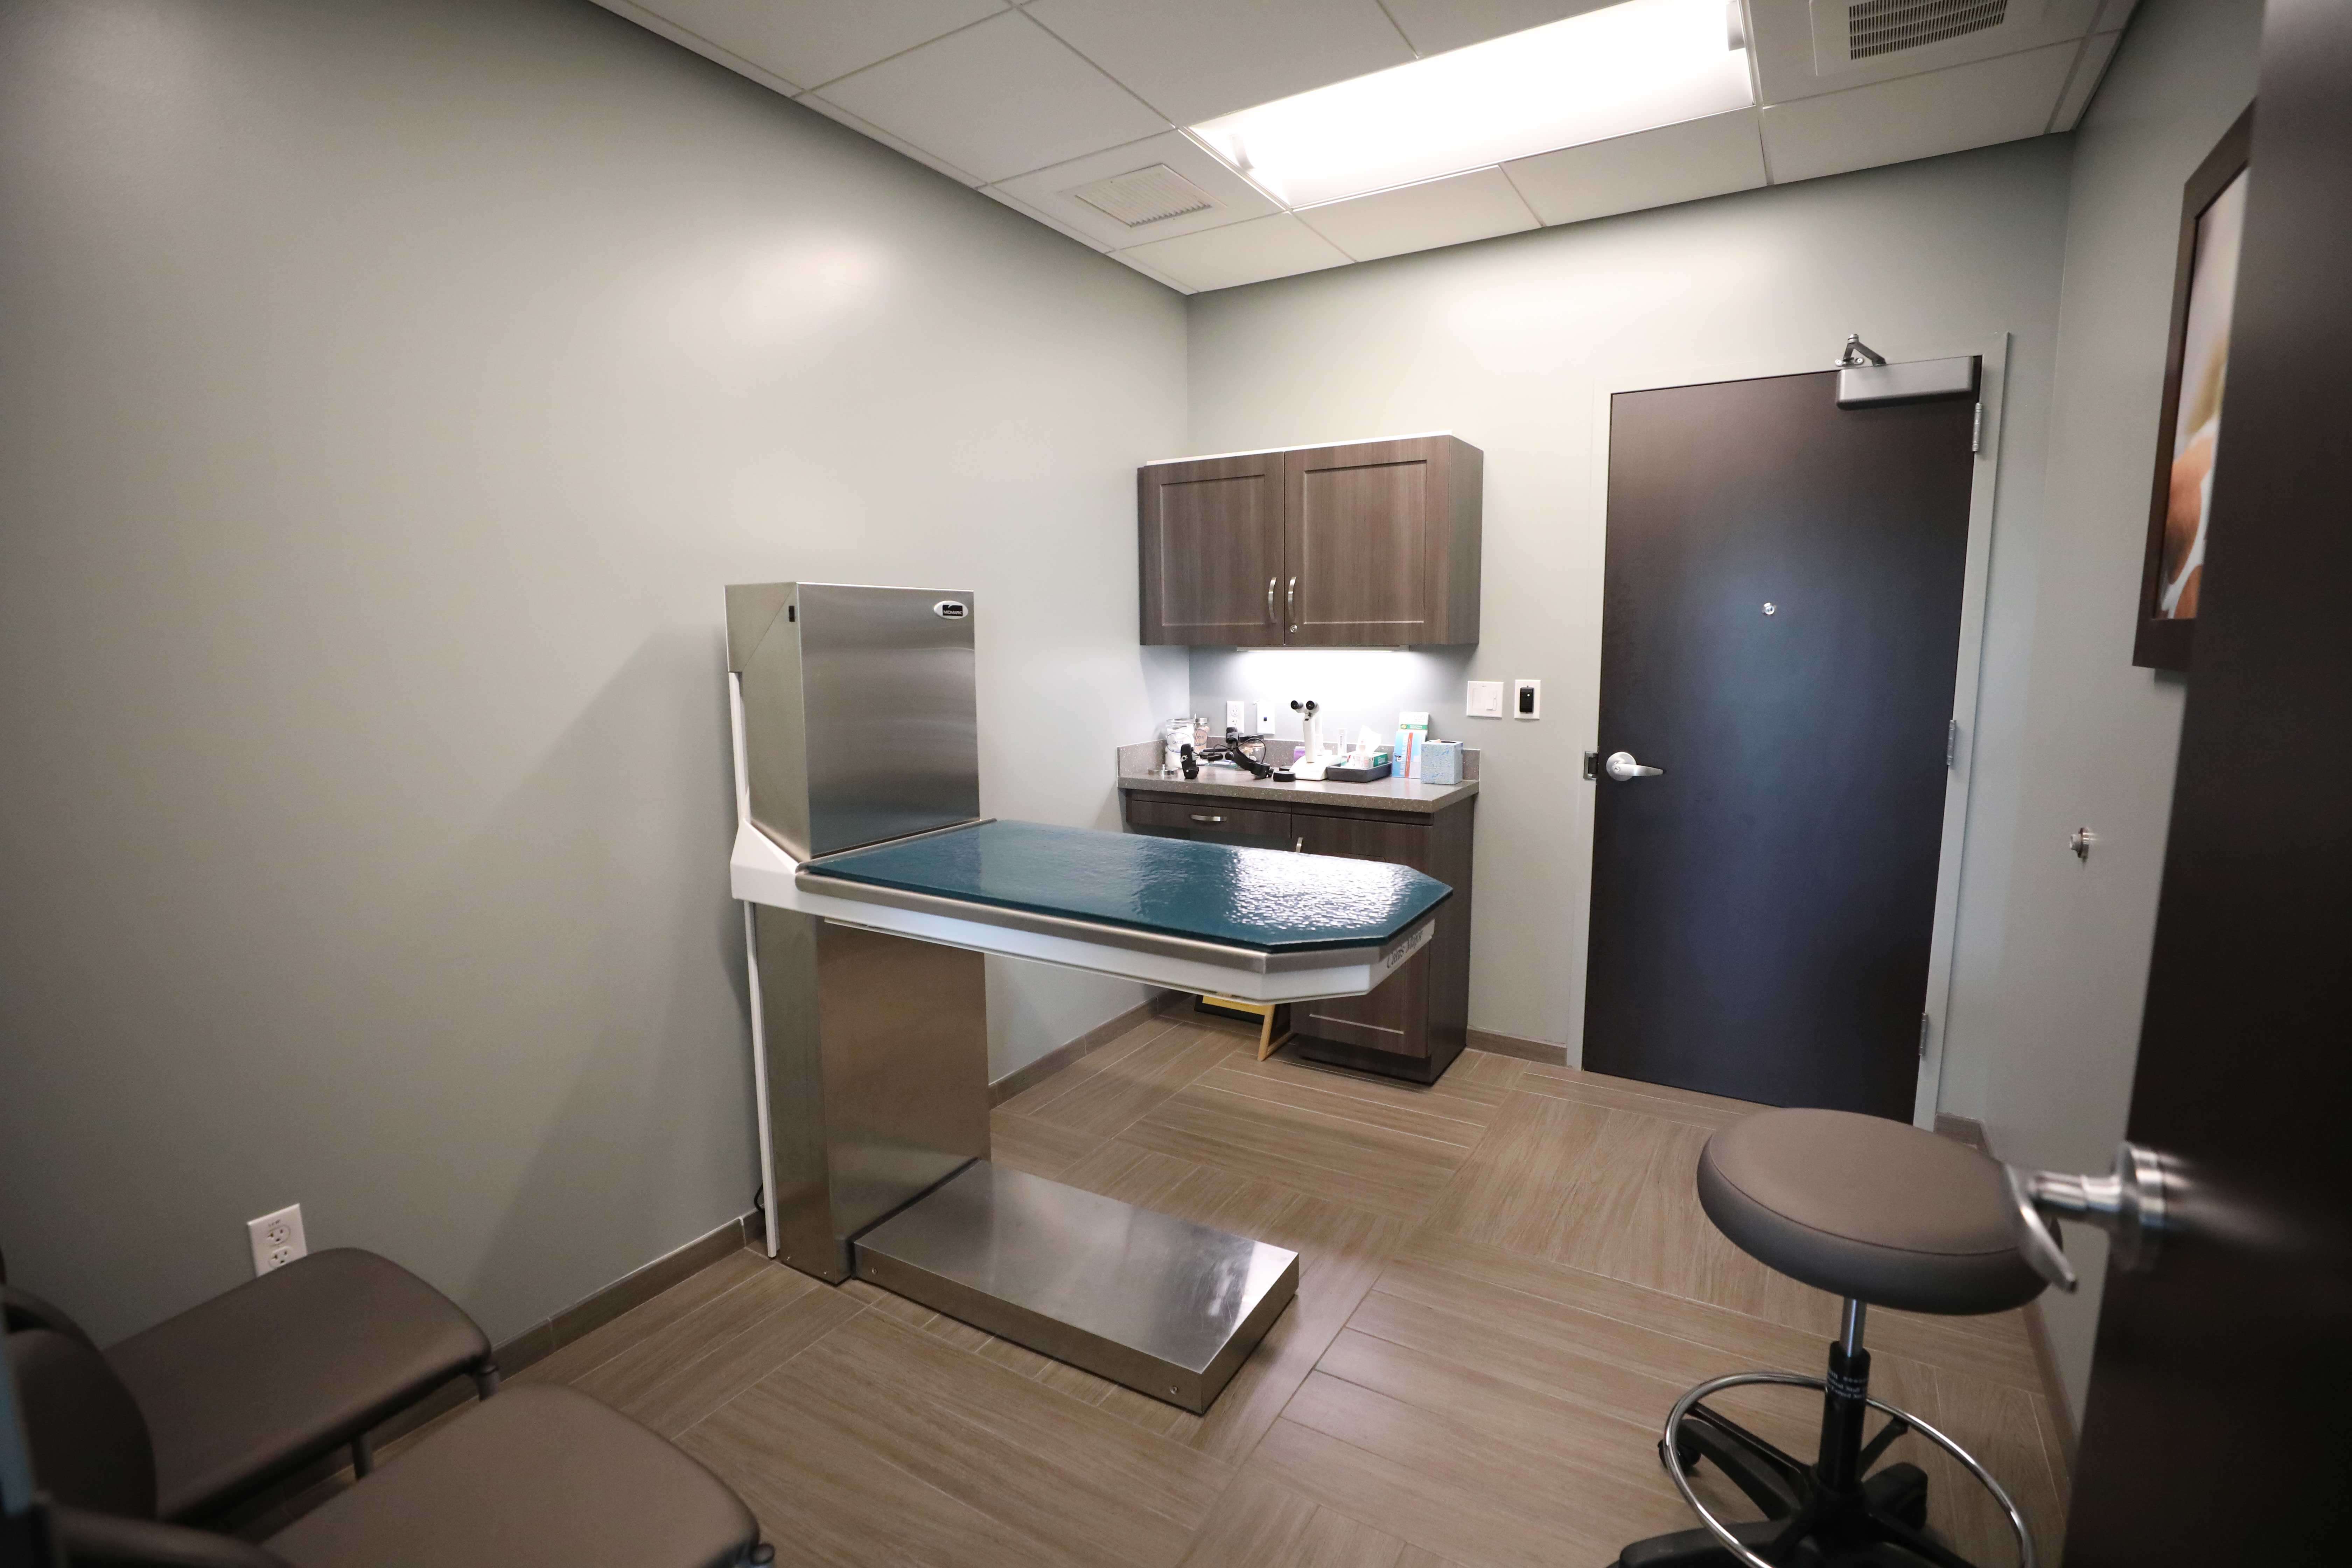 Brightly lit, simply furnished room has a central table for patient examination.